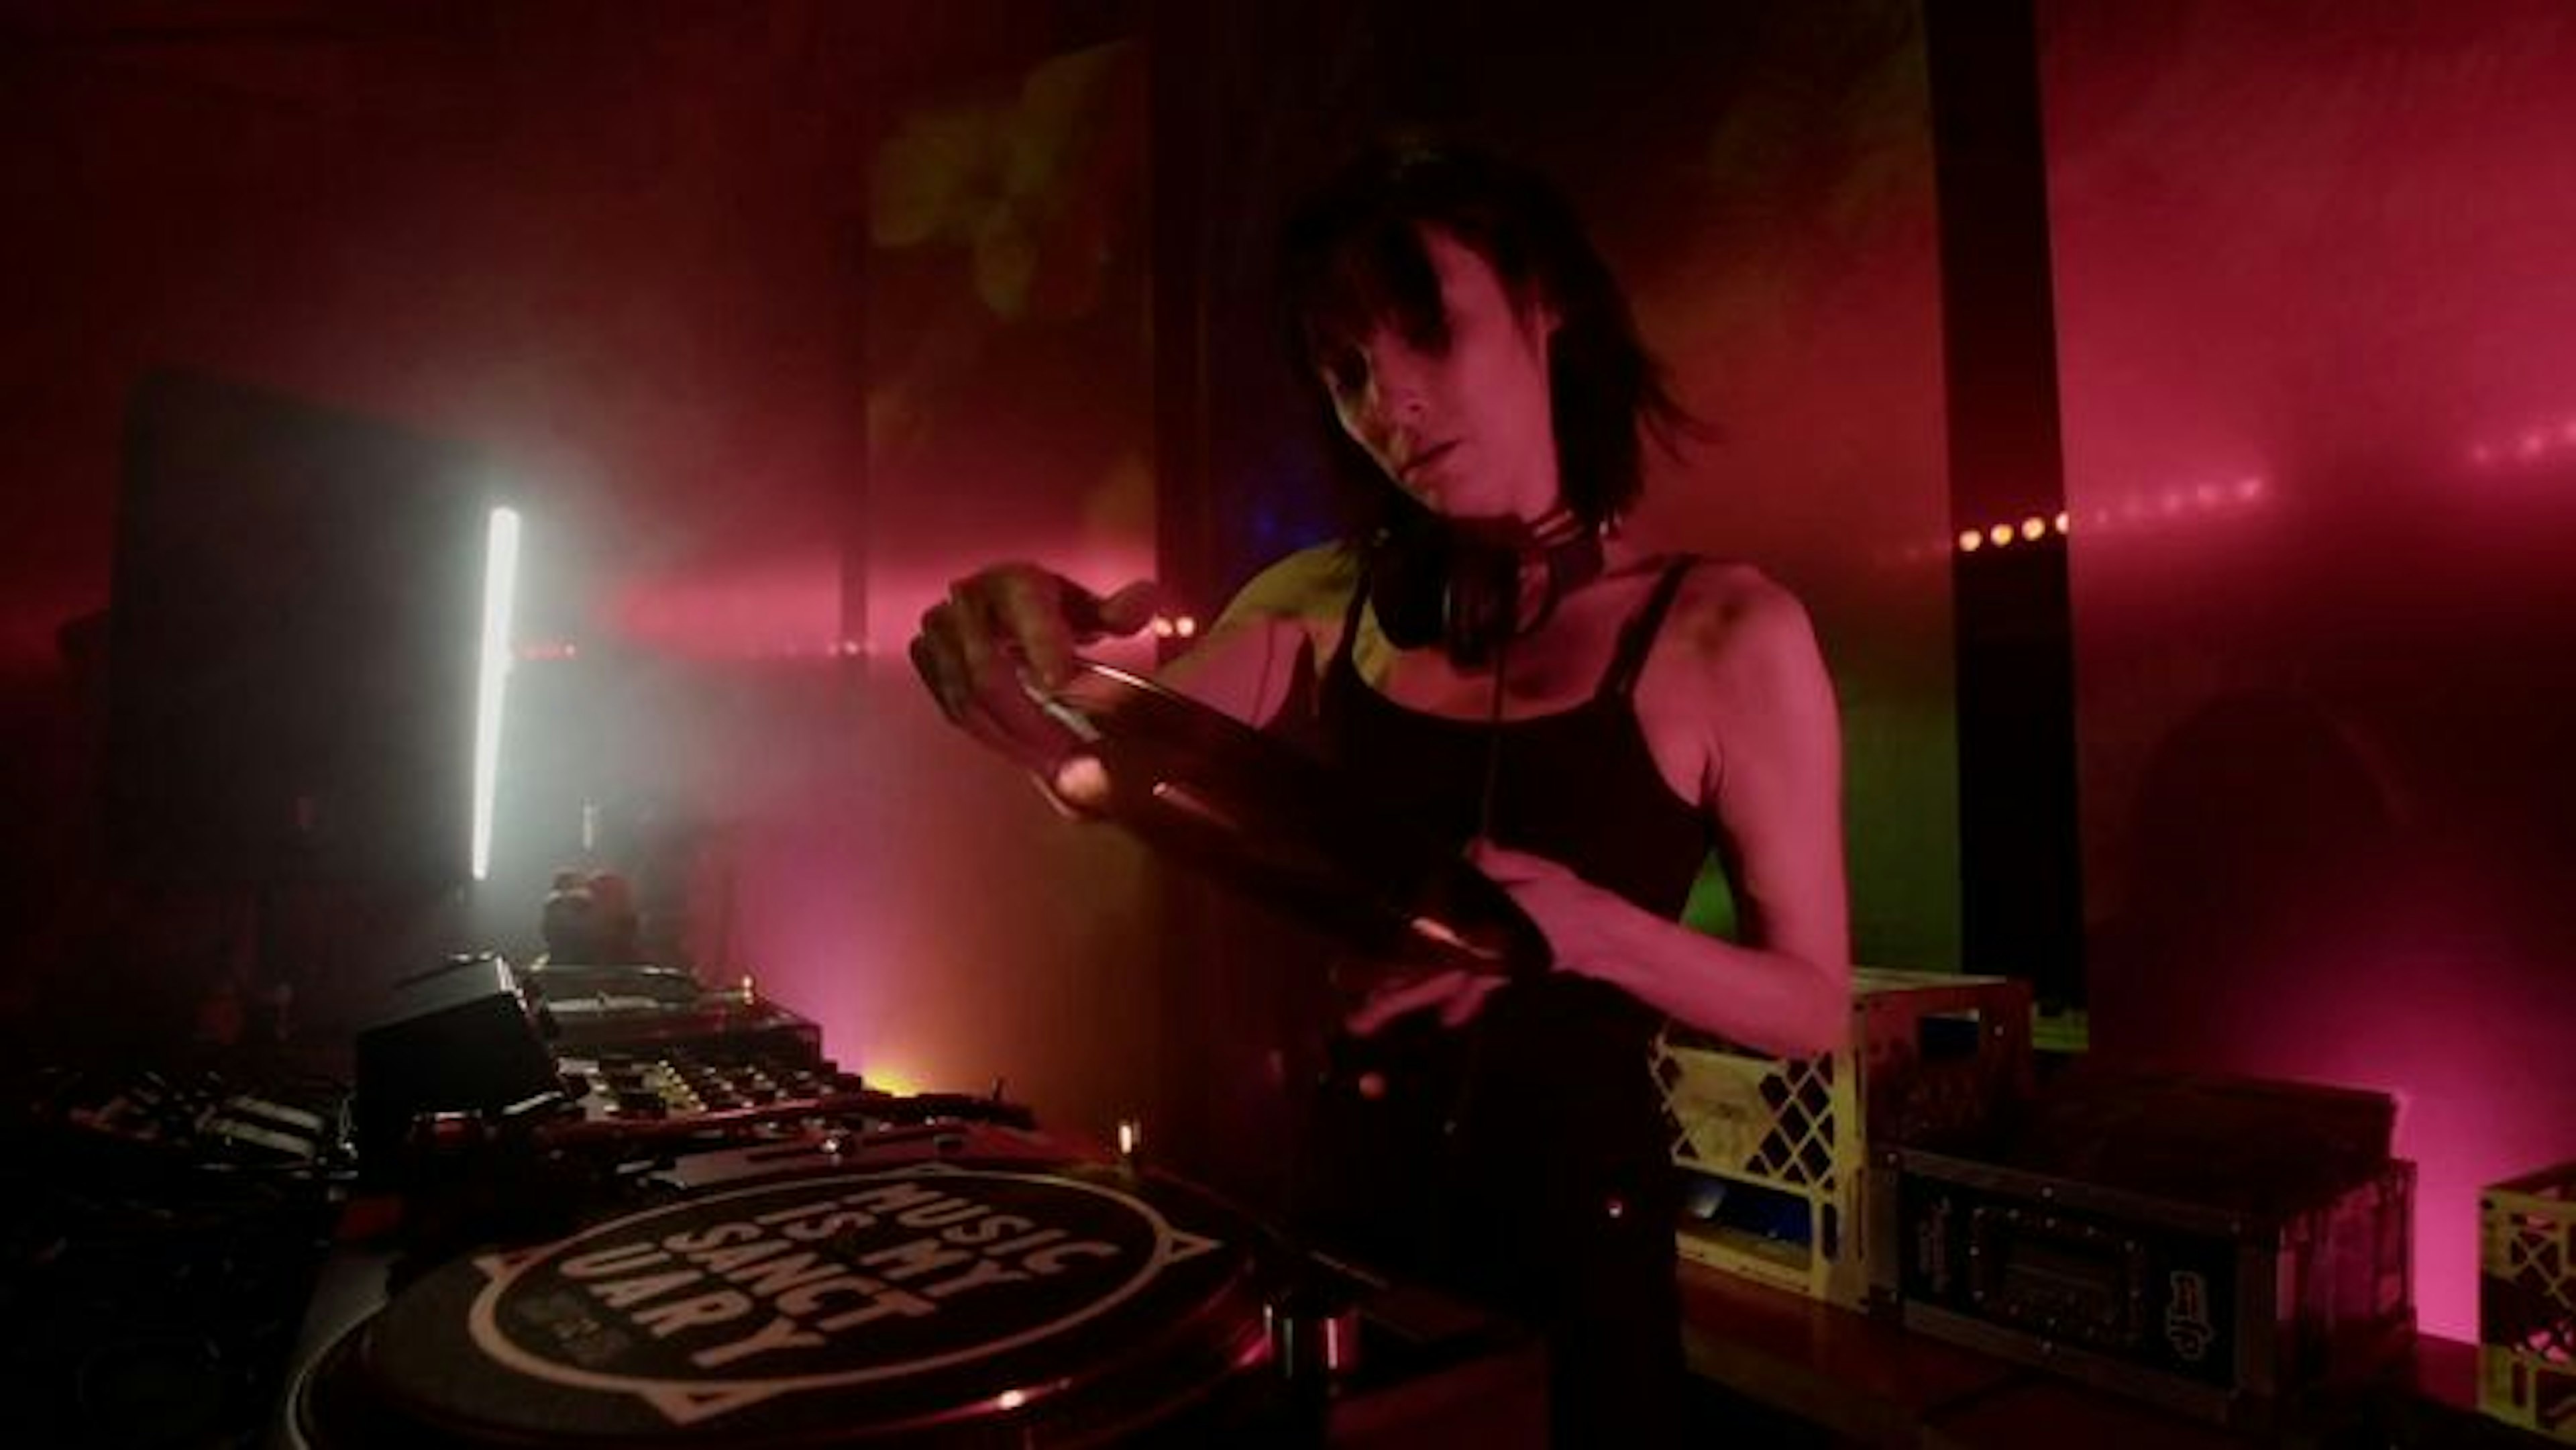 Diana in front of a DJ booth lit in dim red light holding a 12" record. She wears a black tank top and headphones around her neck.